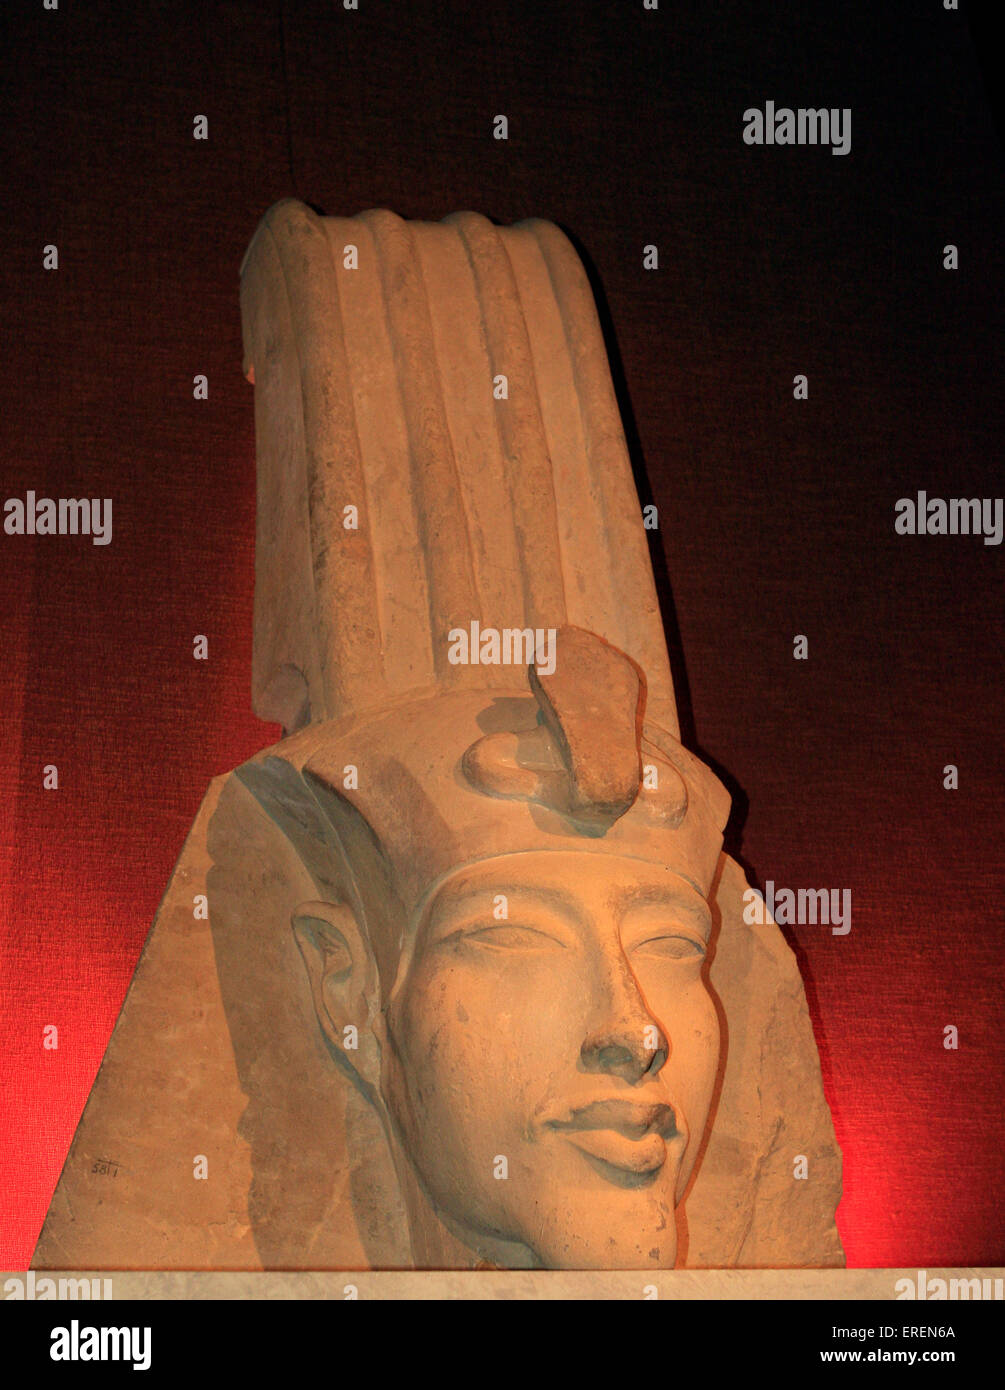 Head of a Colossal Statue of Amenhotep IV (Akhenaten), Reign of Amenhotep IV (Akhenaten) (1353-1336 BCE), Sandstone, Karnak, Stock Photo